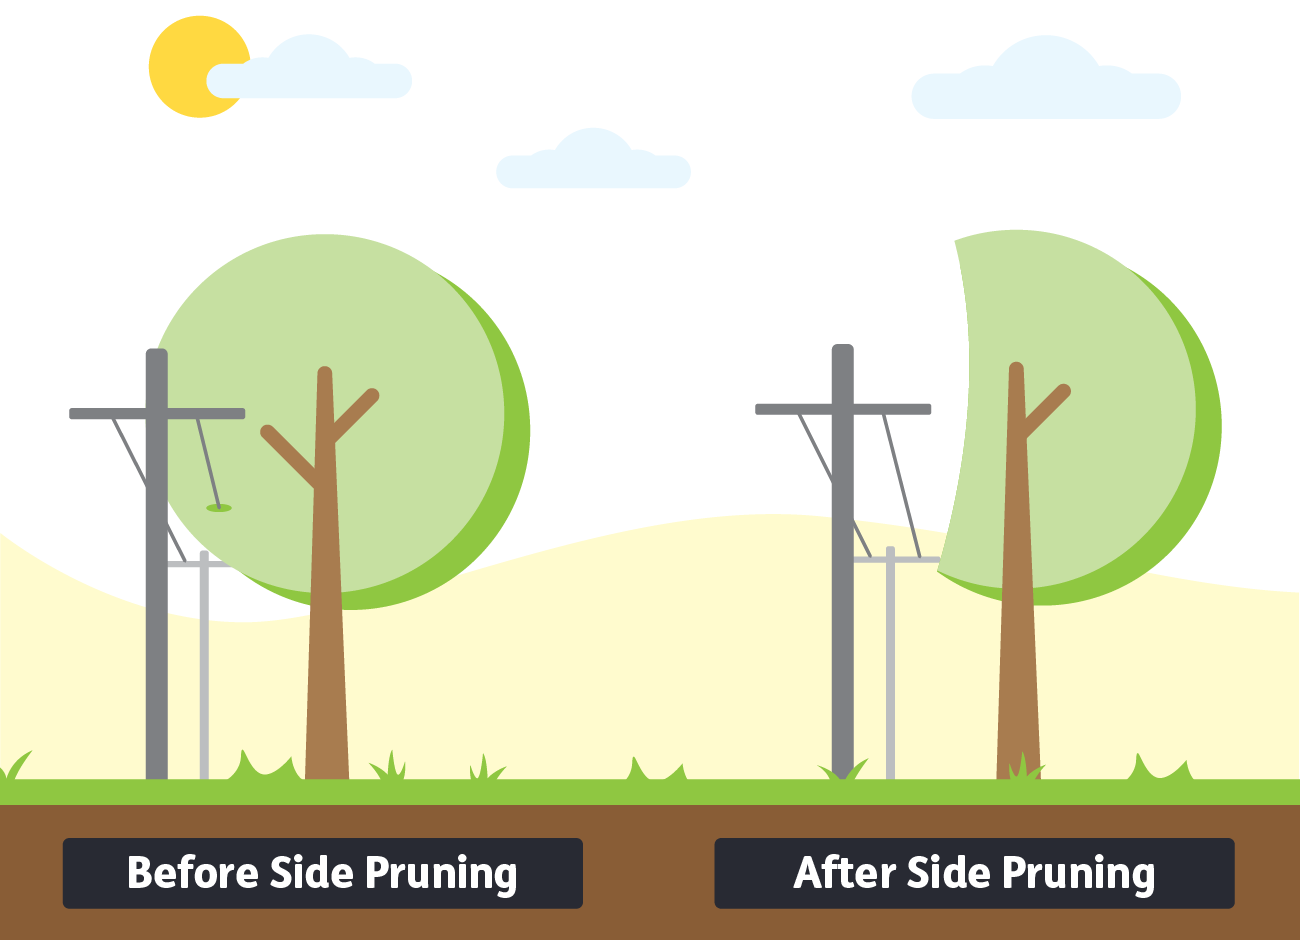 Graphic depicting side pruning technique